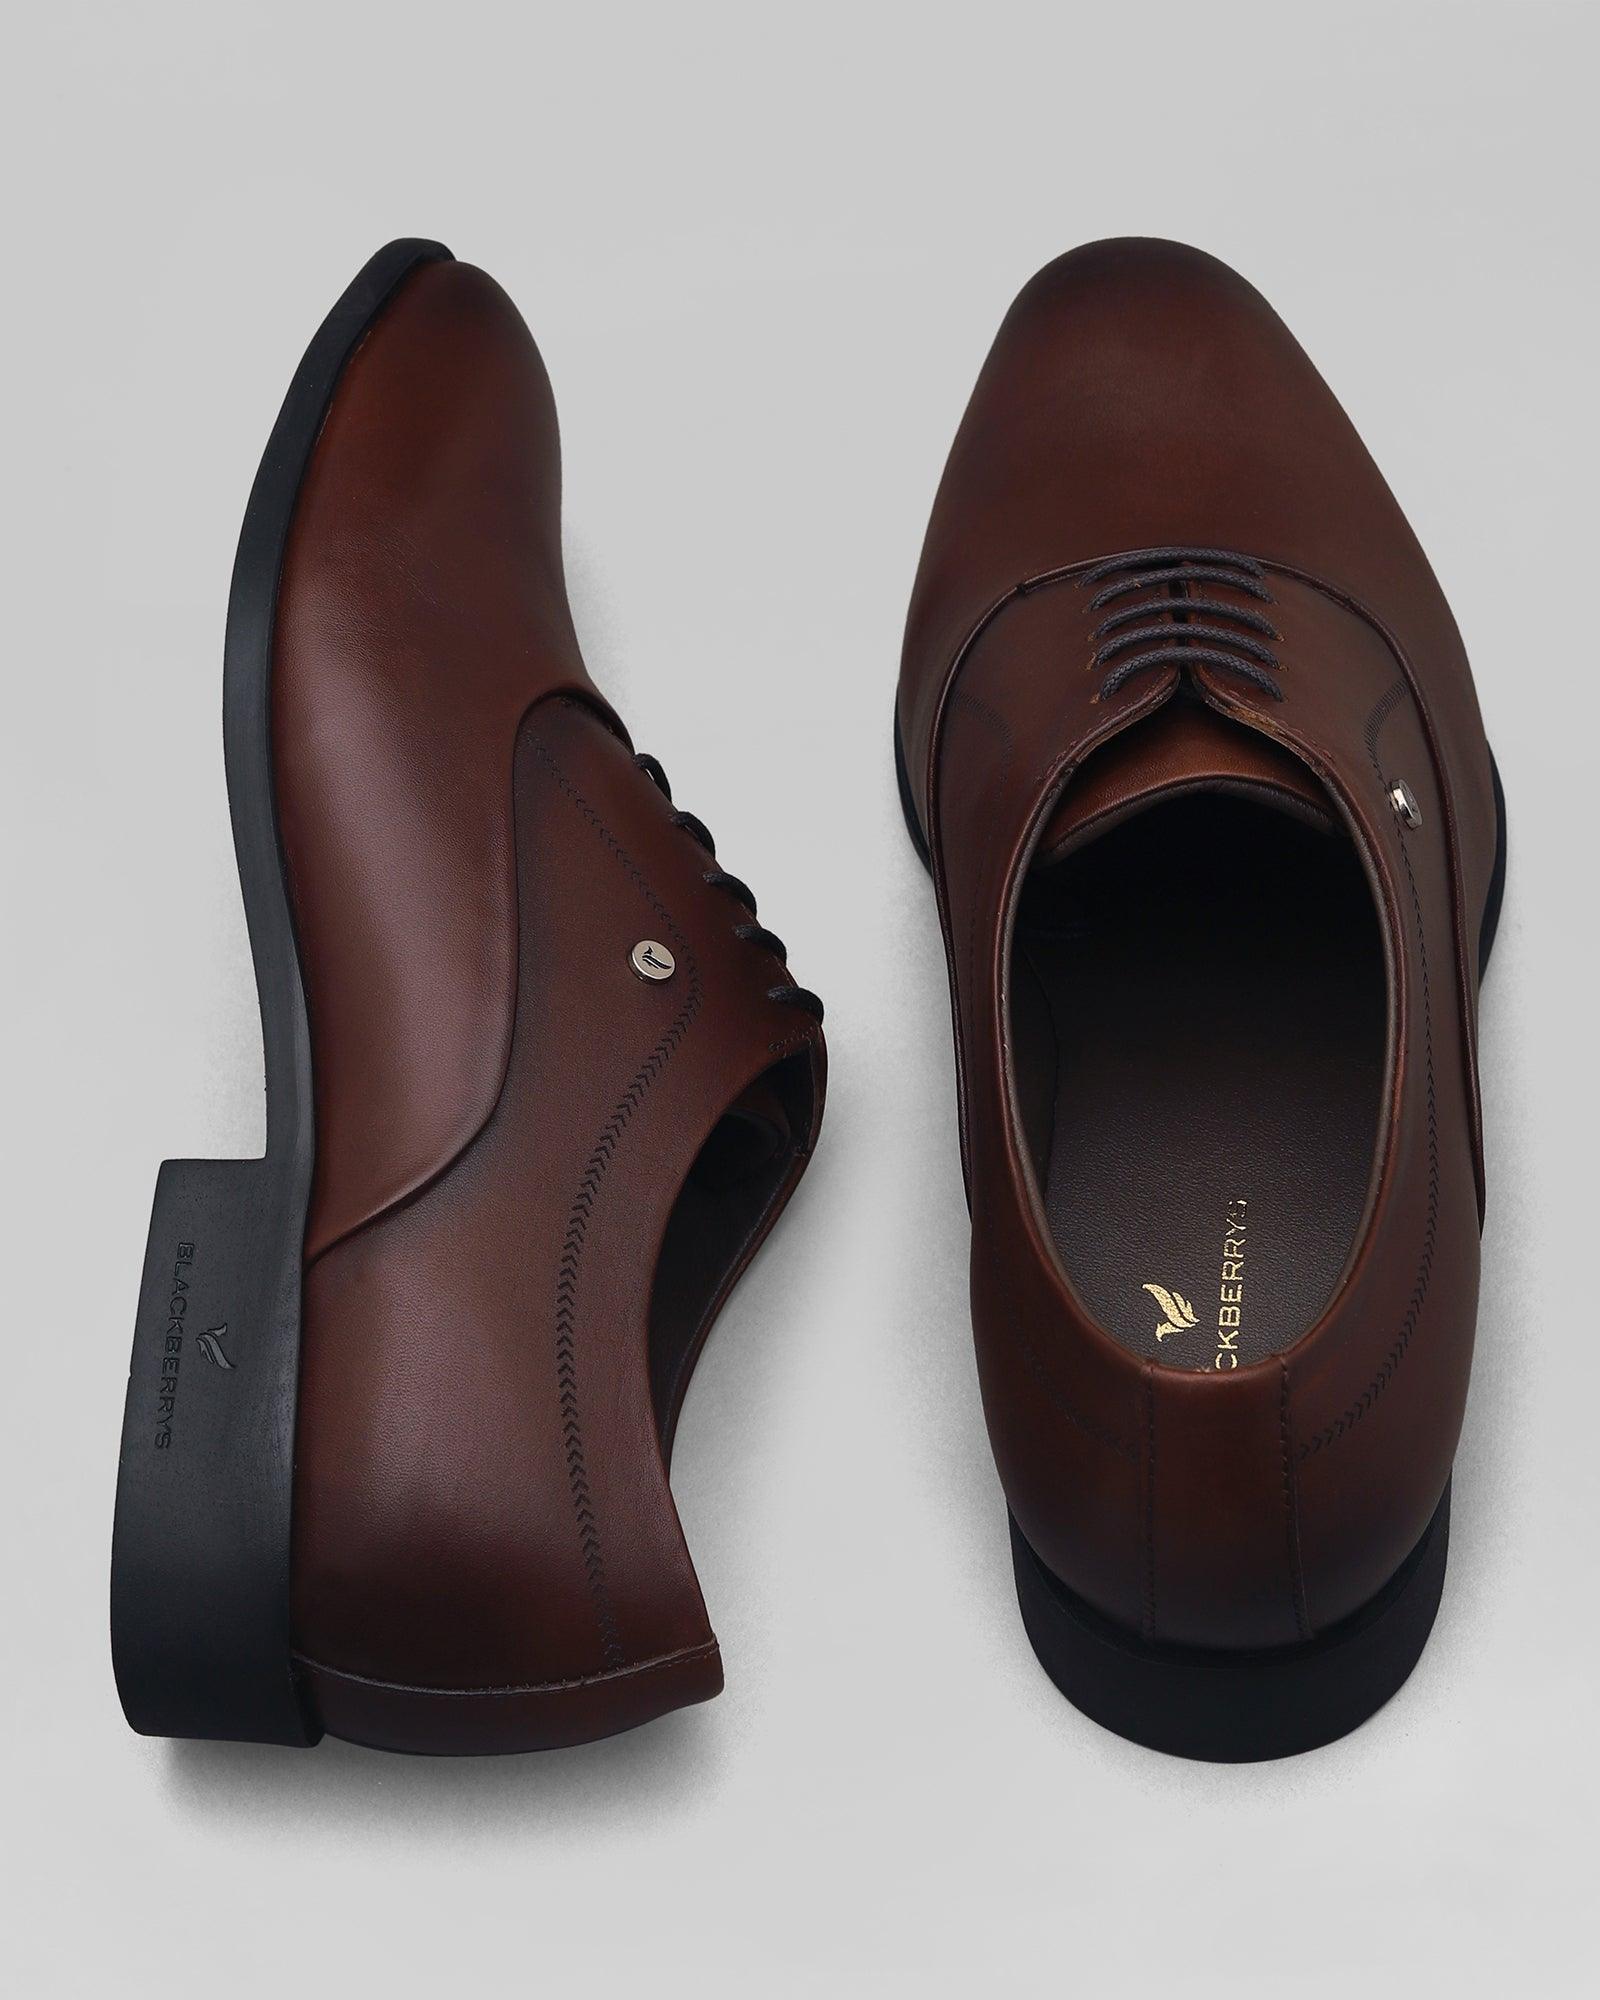 Must Haves Leather Burgandy Solid Oxford Shoes - Lebum